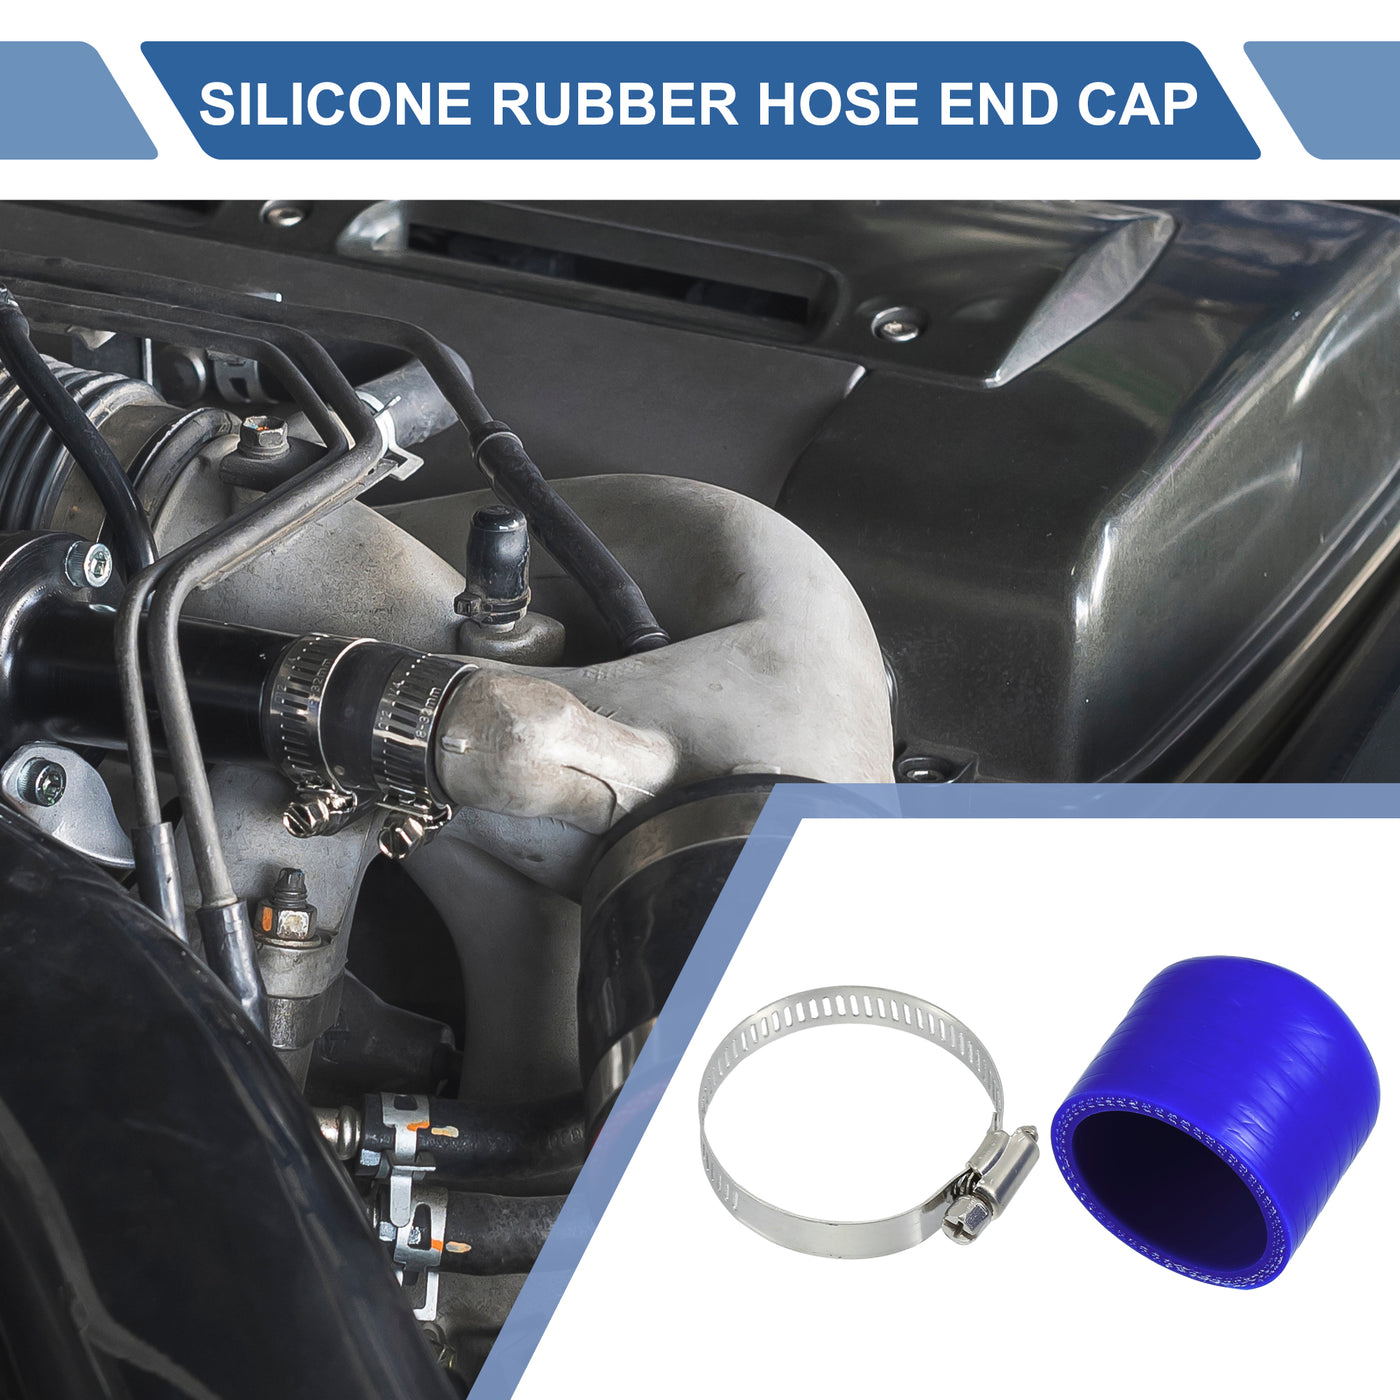 X AUTOHAUX 1 Set 30mm Length 38mm/1.50" ID Blue Car Silicone Rubber Hose End Cap with Clamps Silicone Reinforced Blanking Cap for Bypass Tube Universal